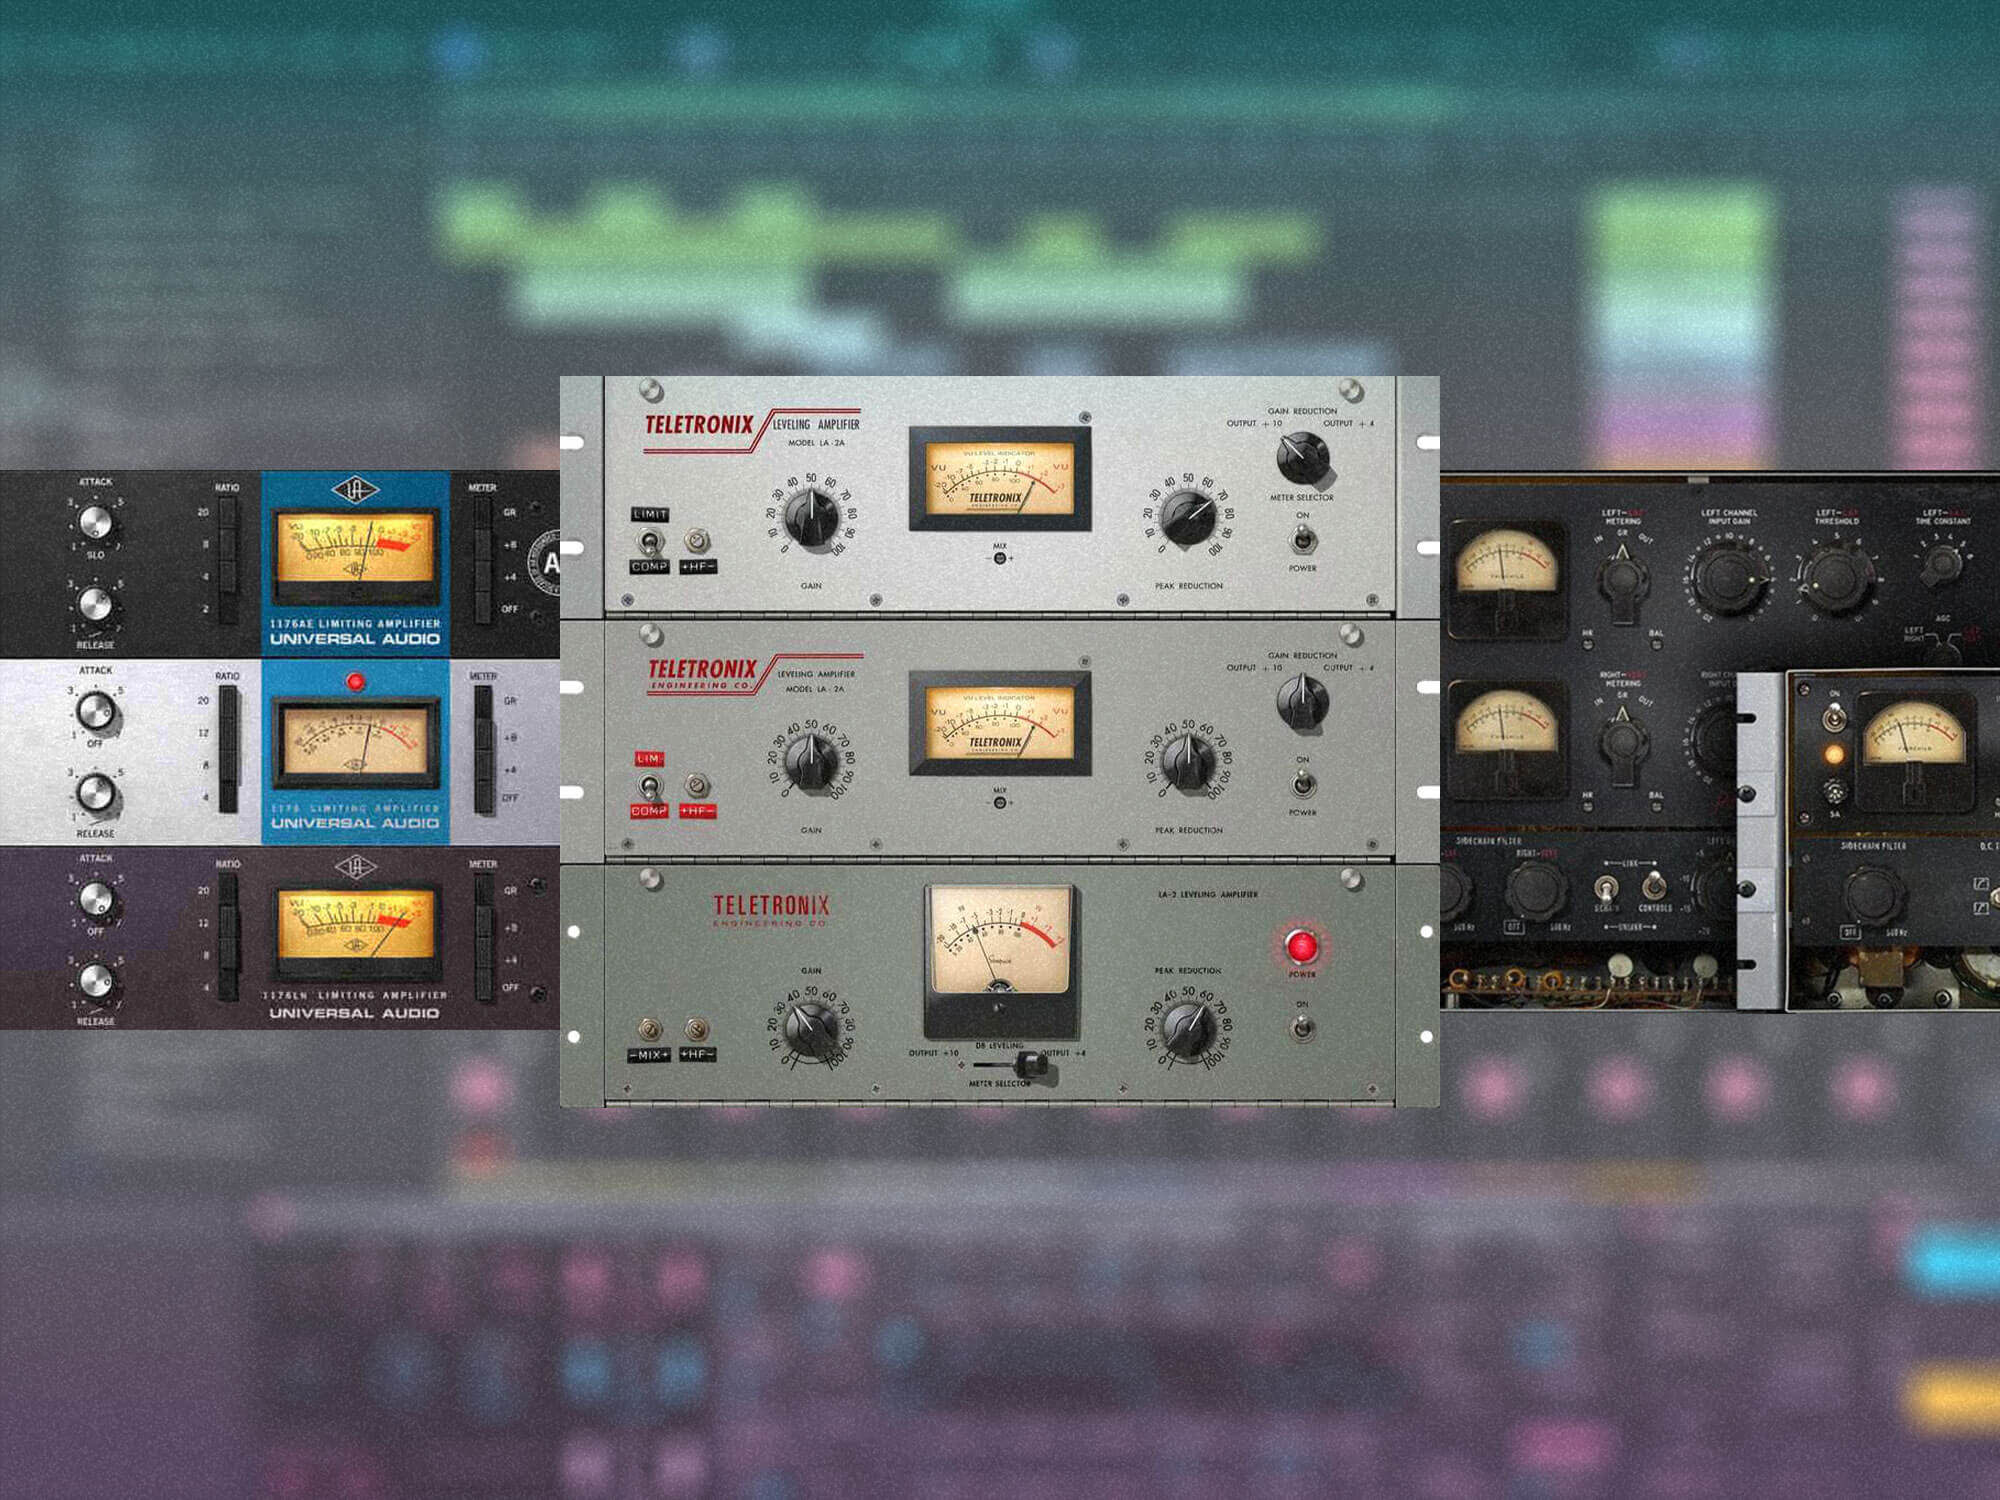 UAD Triple Crown Compressor bundle is now available at 94% discount, saving you $1,120